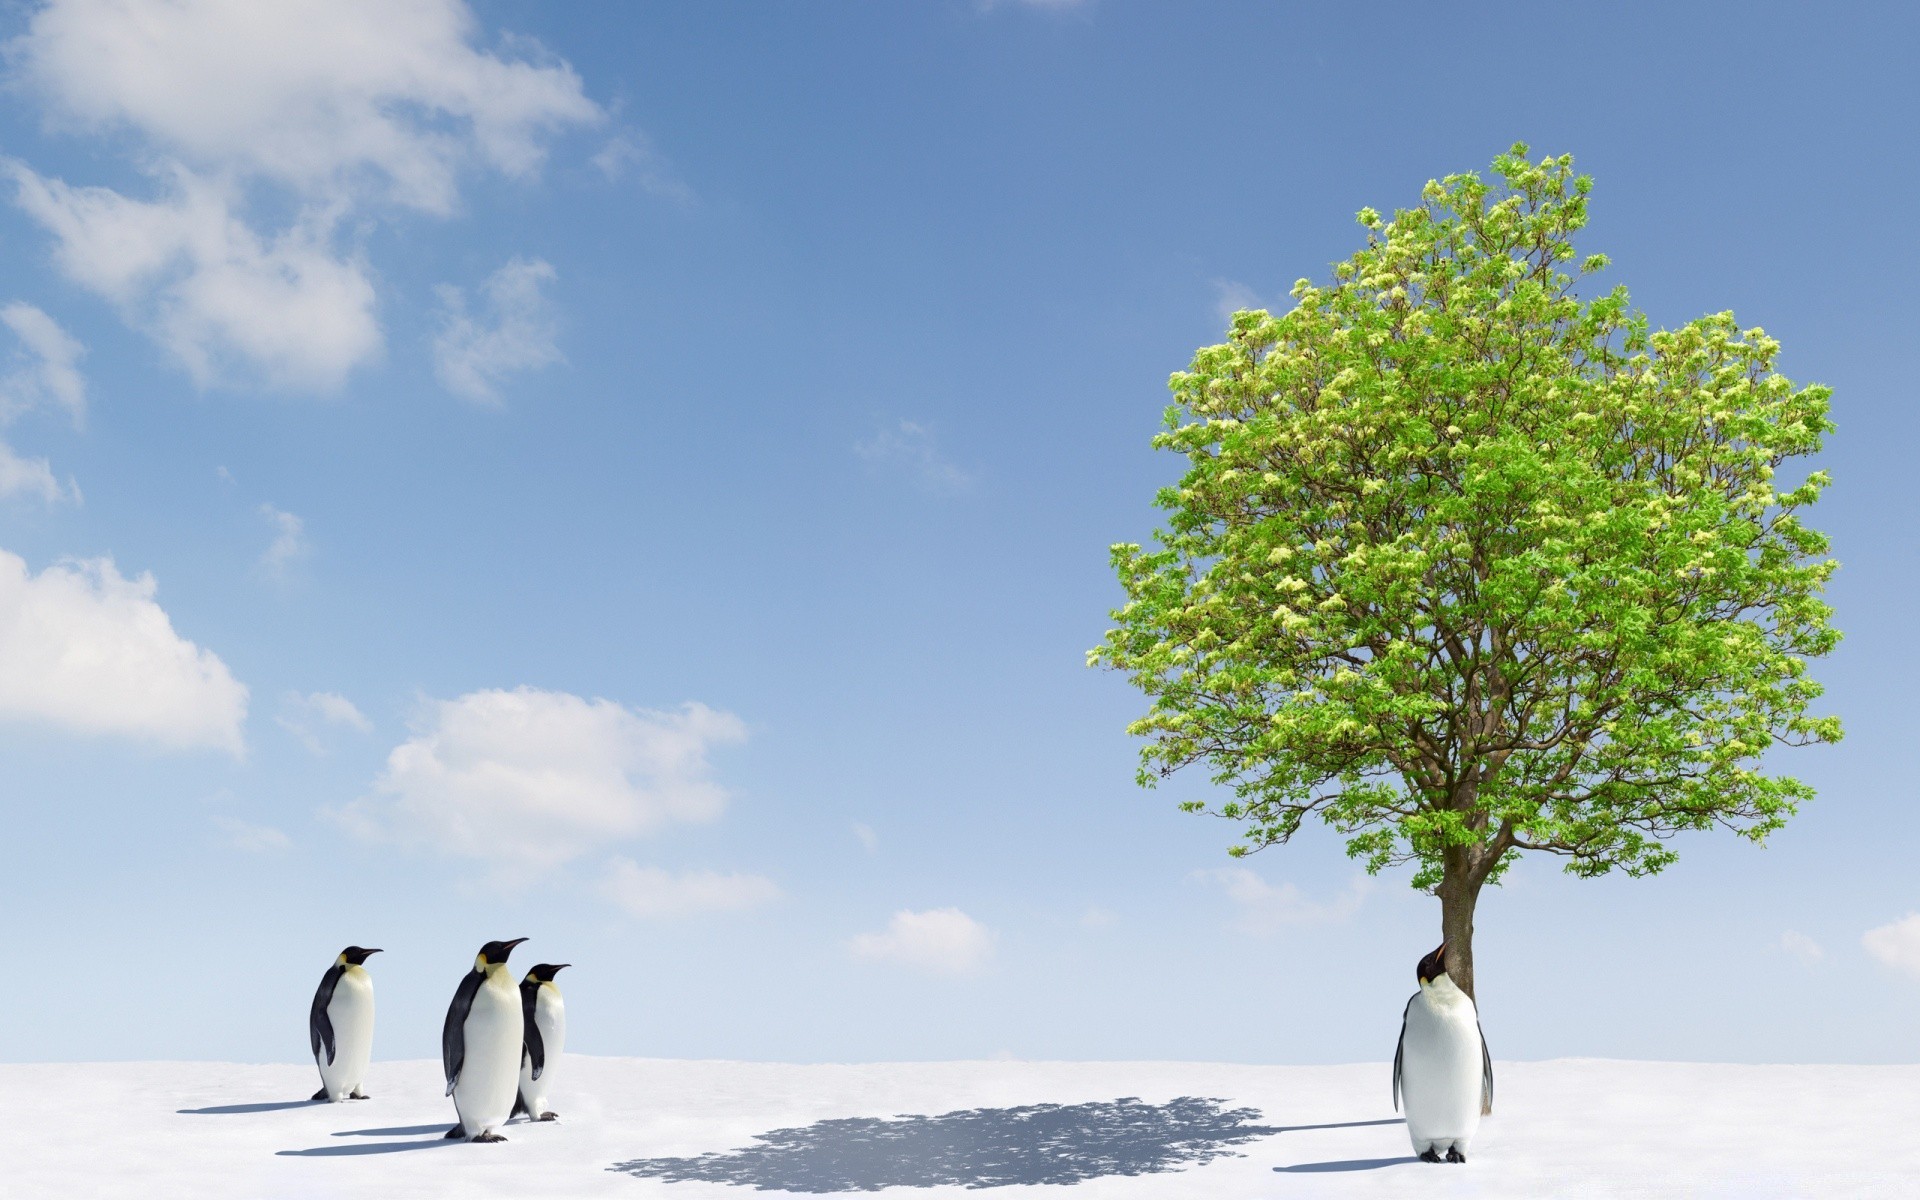 penguin snow nature winter cold outdoors tree ice frosty sky bird water